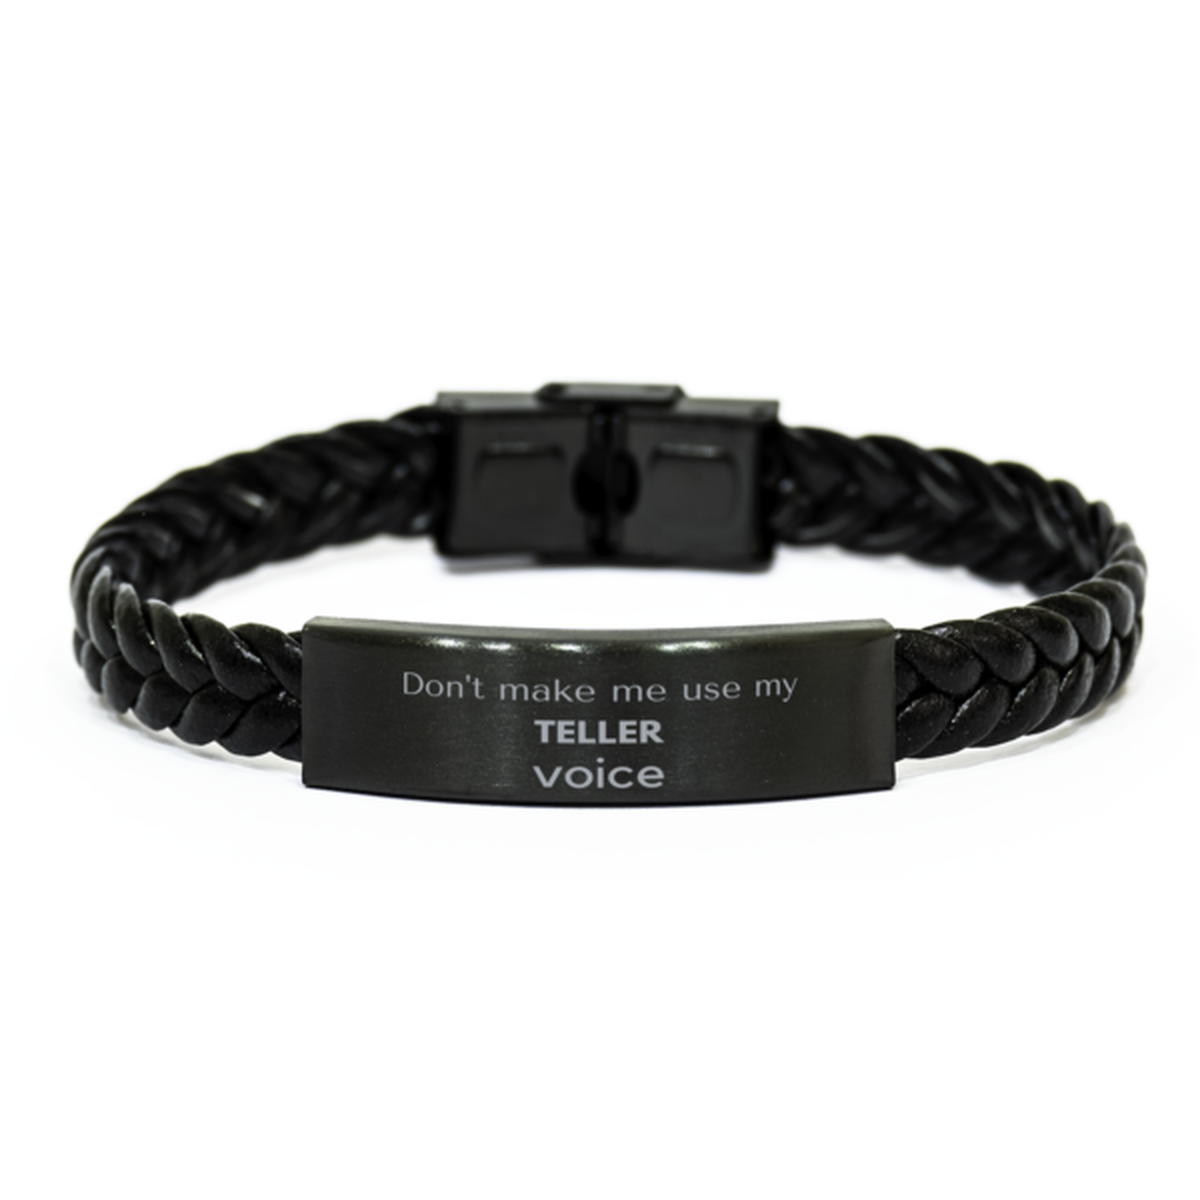 Don't make me use my Teller voice, Sarcasm Teller Gifts, Christmas Teller Braided Leather Bracelet Birthday Unique Gifts For Teller Coworkers, Men, Women, Colleague, Friends